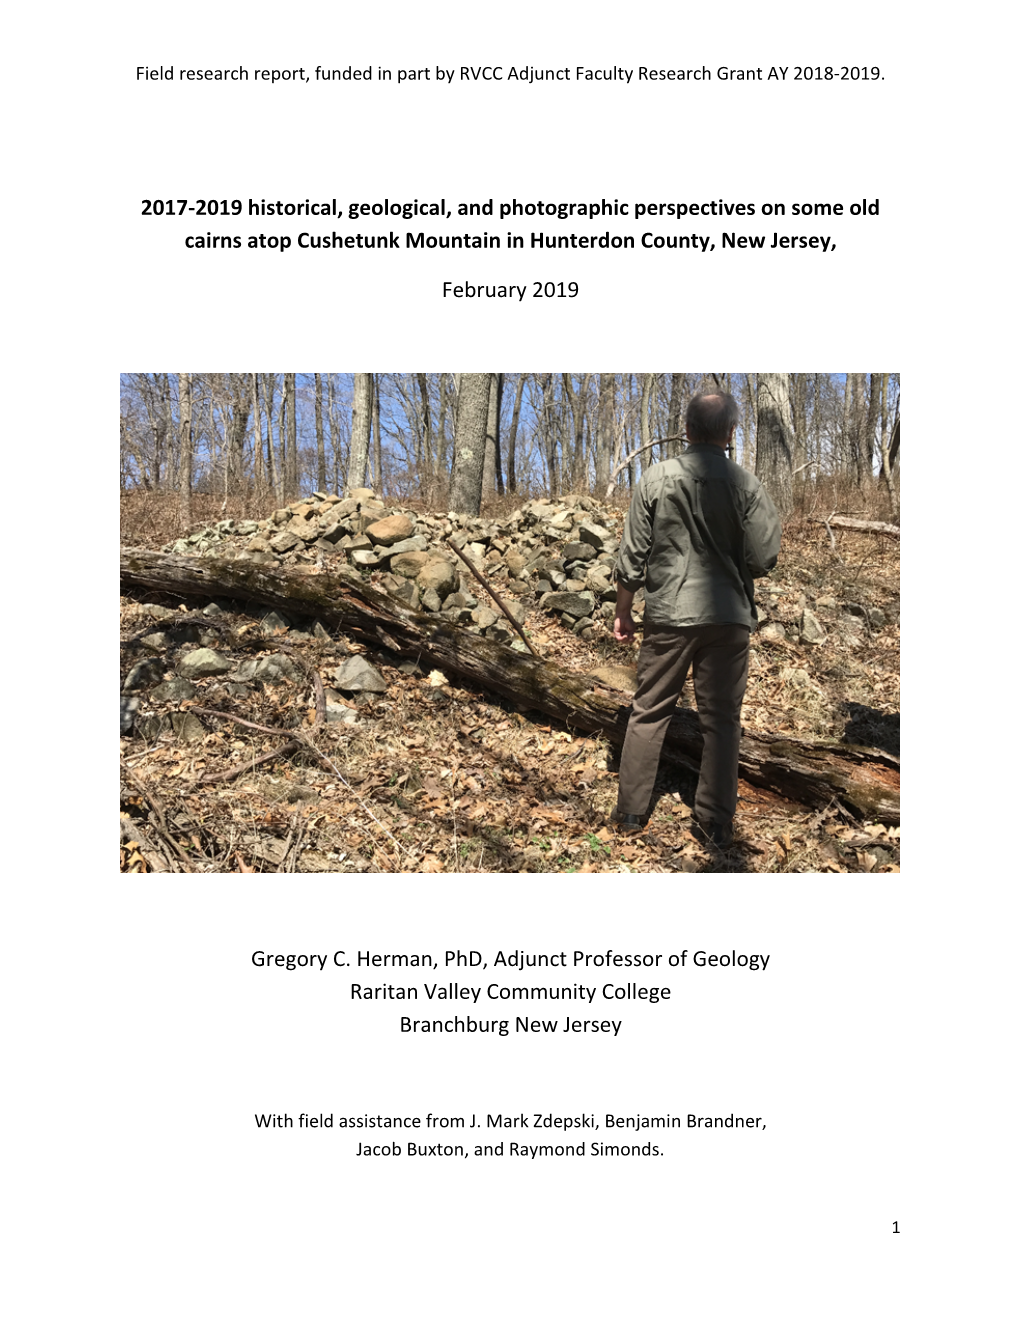 2017-2019 Historical, Geological, and Photographic Perspectives on Some Old Cairns Atop Cushetunk Mountain in Hunterdon County, New Jersey